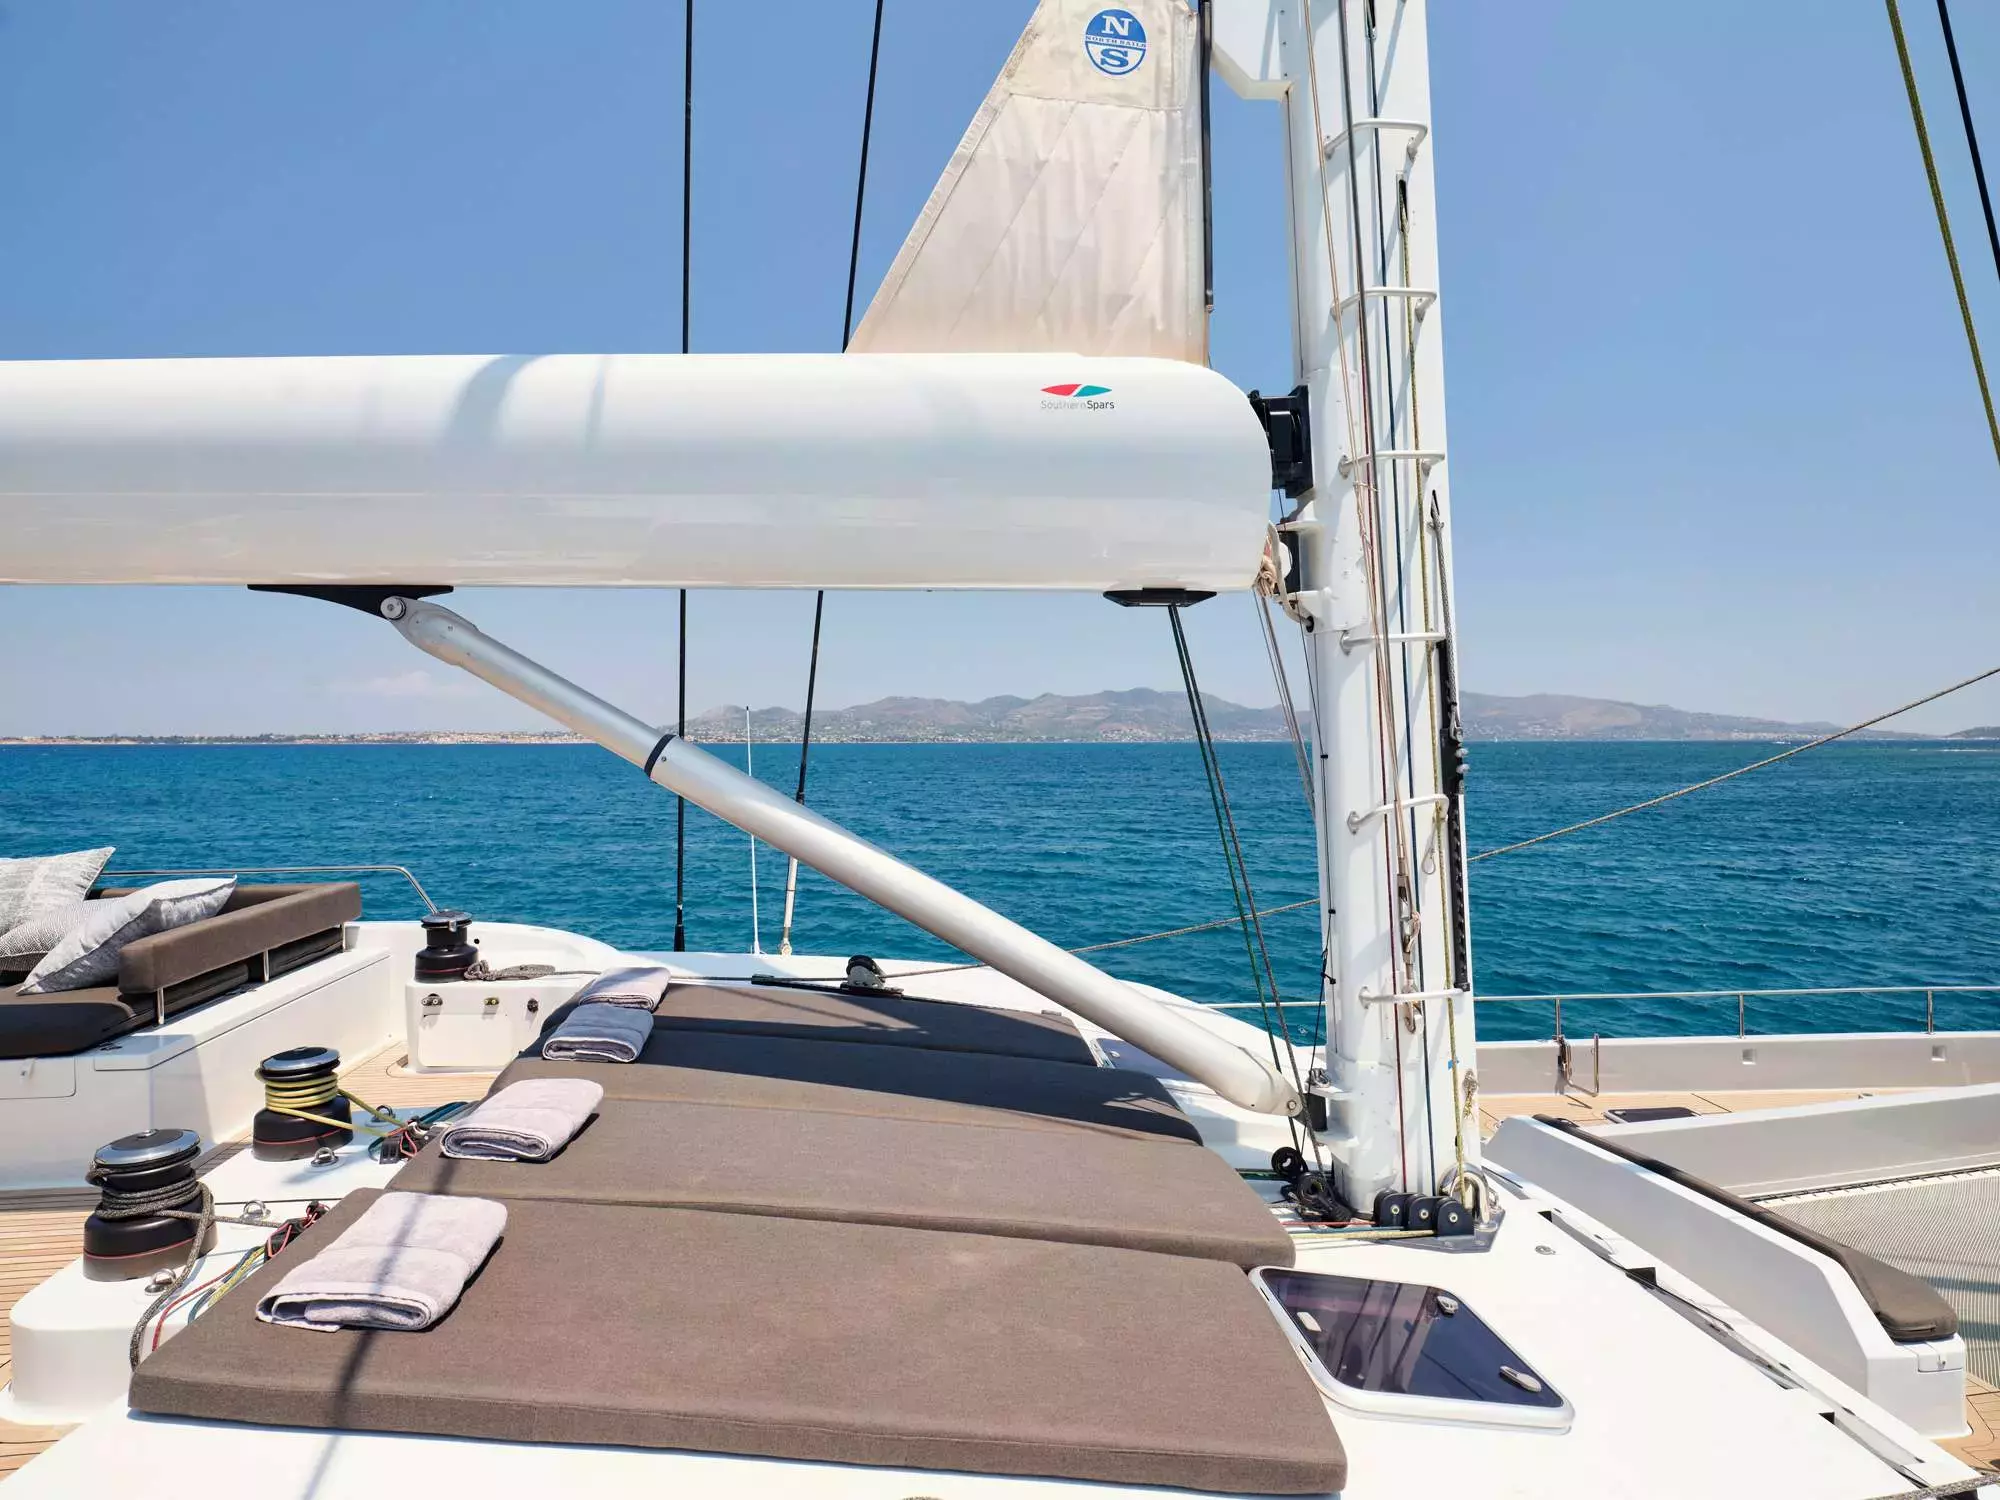 Sameli by Two Oceans - Special Offer for a private Sailing Catamaran Rental in Lavrion with a crew